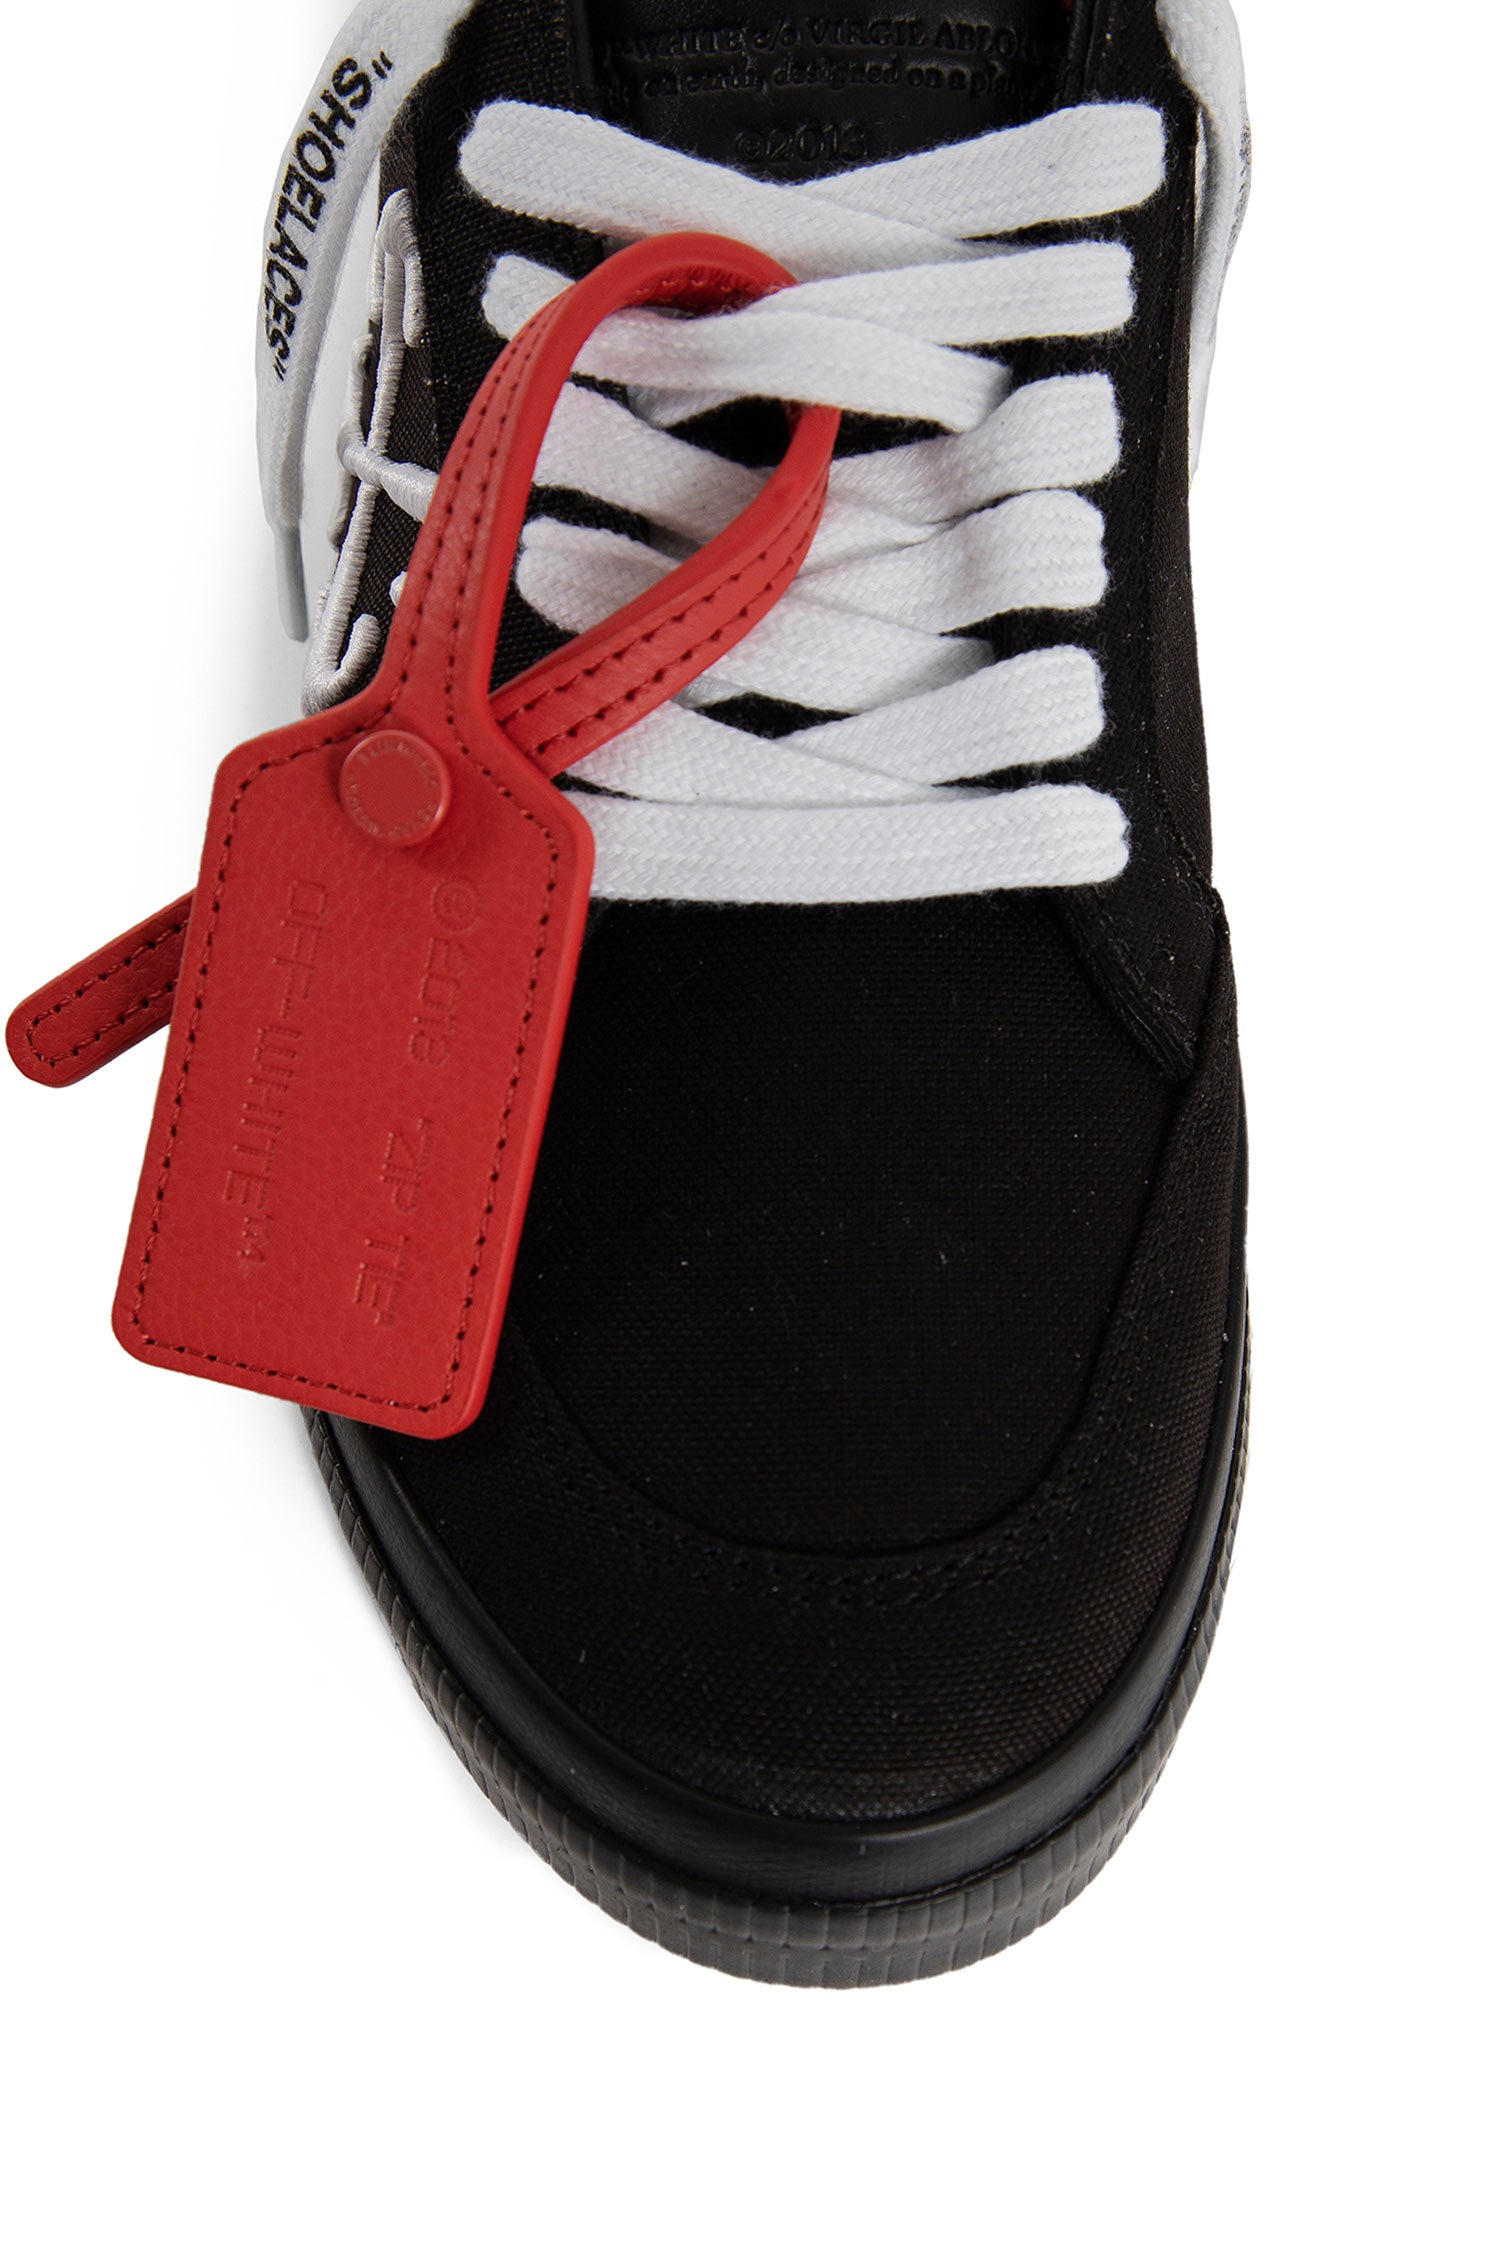 OFF-WHITE WOMAN BLACK SNEAKERS